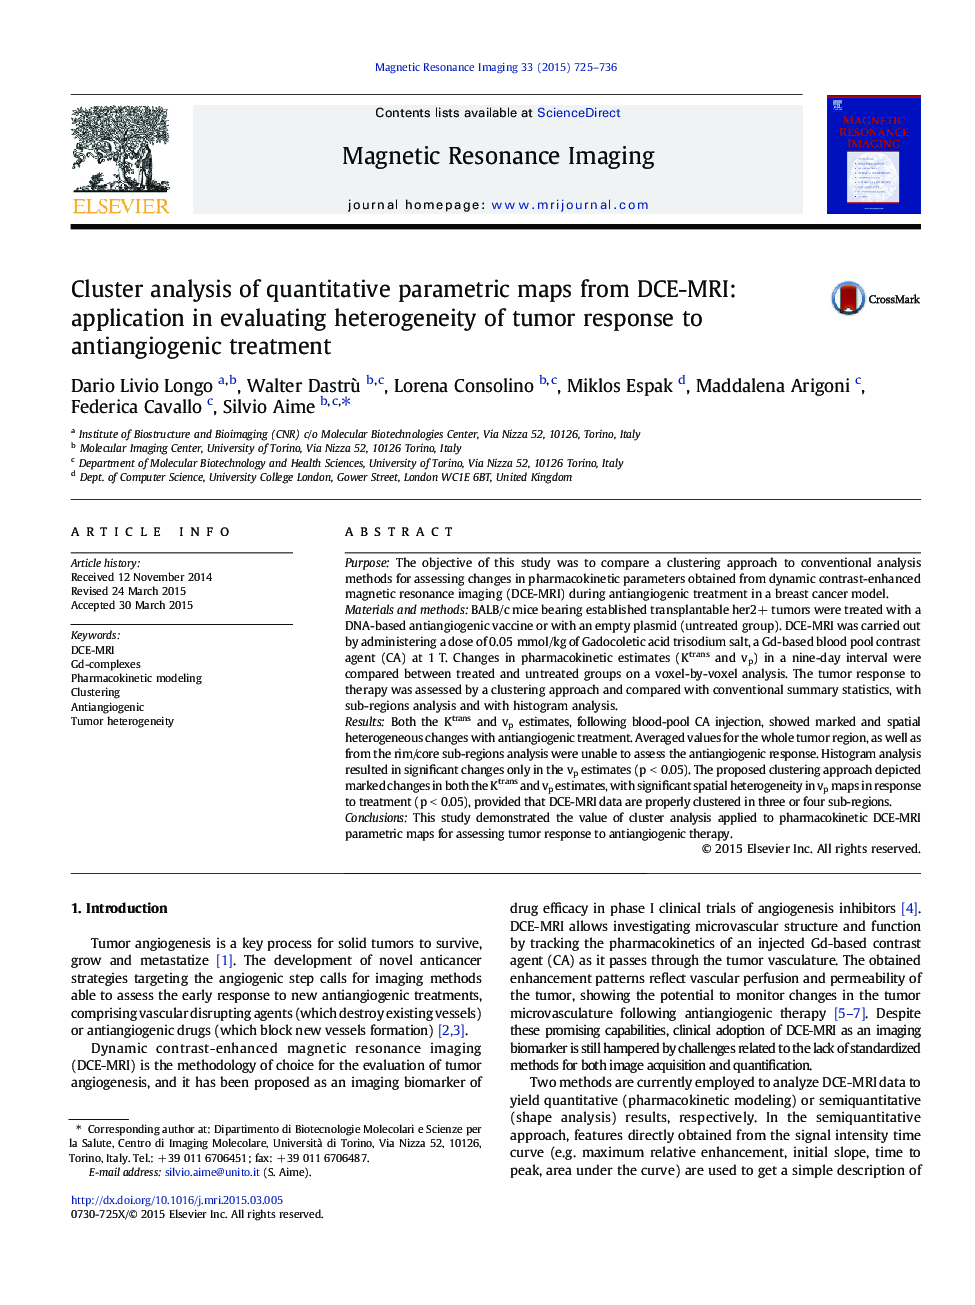 Cluster analysis of quantitative parametric maps from DCE-MRI: application in evaluating heterogeneity of tumor response to antiangiogenic treatment